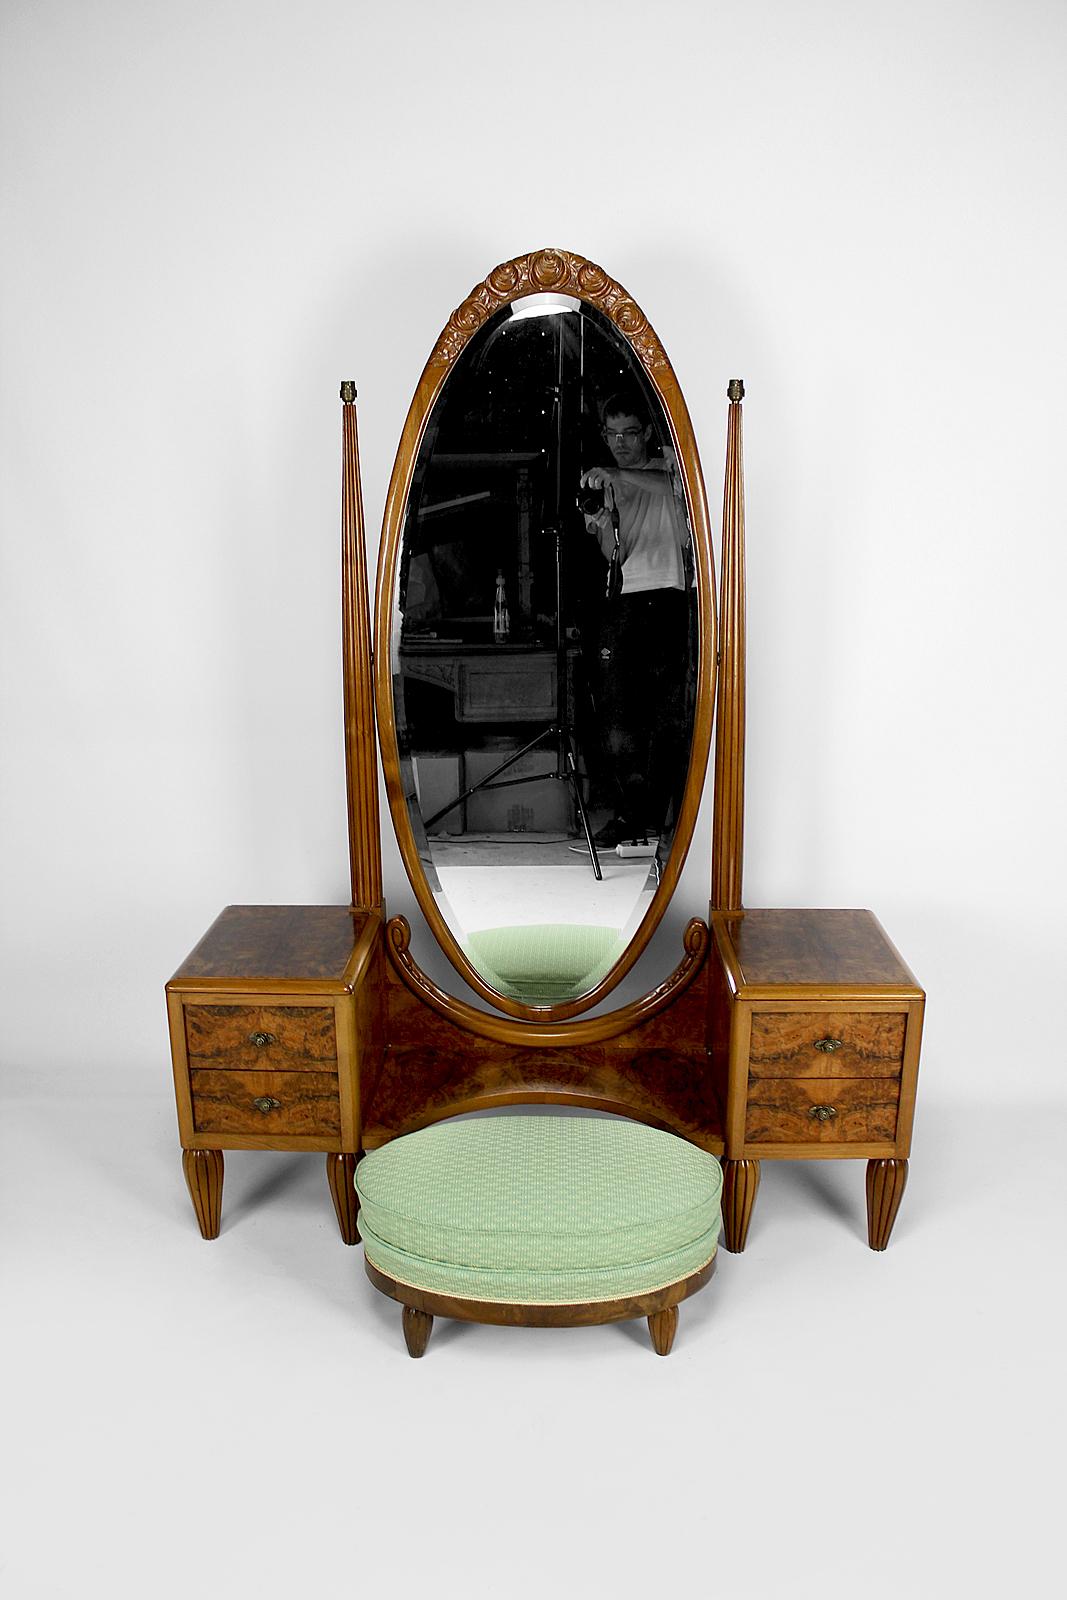 Superb Gauthier-Poinsignon dressing table in burr walnut and walnut, accompanied by its pouf/footrest.

The dressing table consists of a large pivoting beveled oval mirror (tain OK), 2 tapered columns ending in 2 lights (electricity redone), and 4